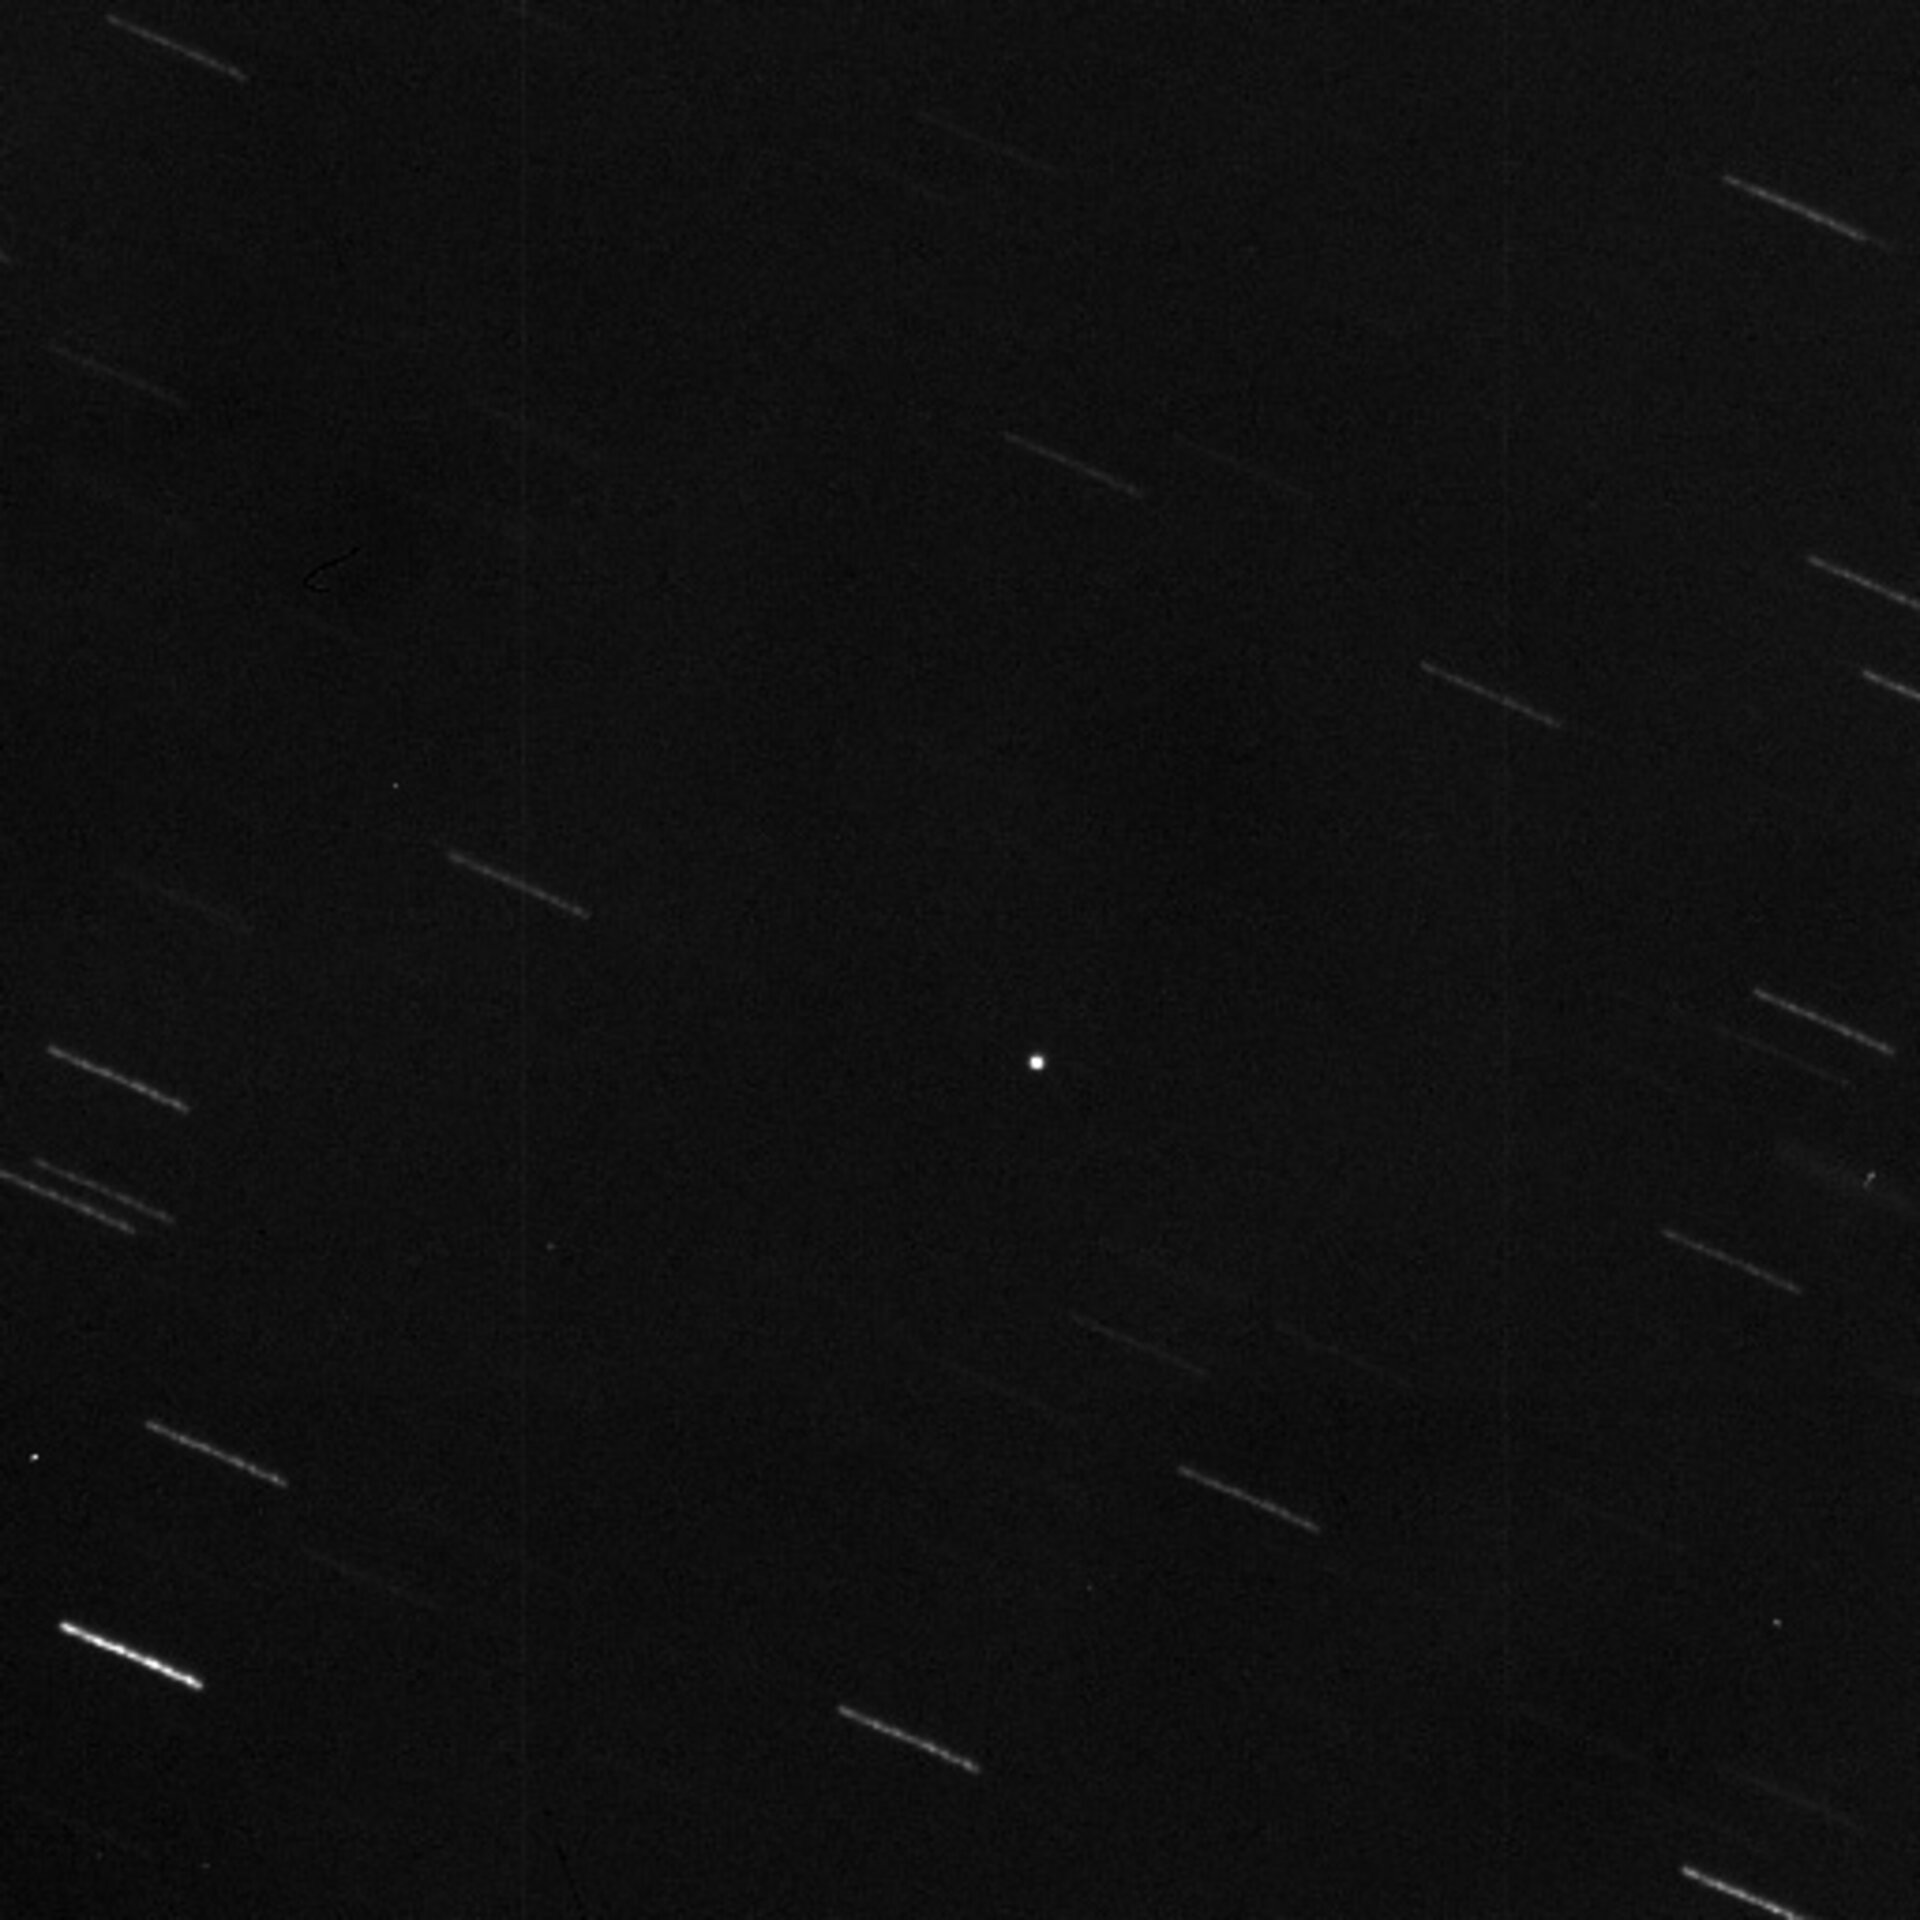 The dot in the centre is Rosetta